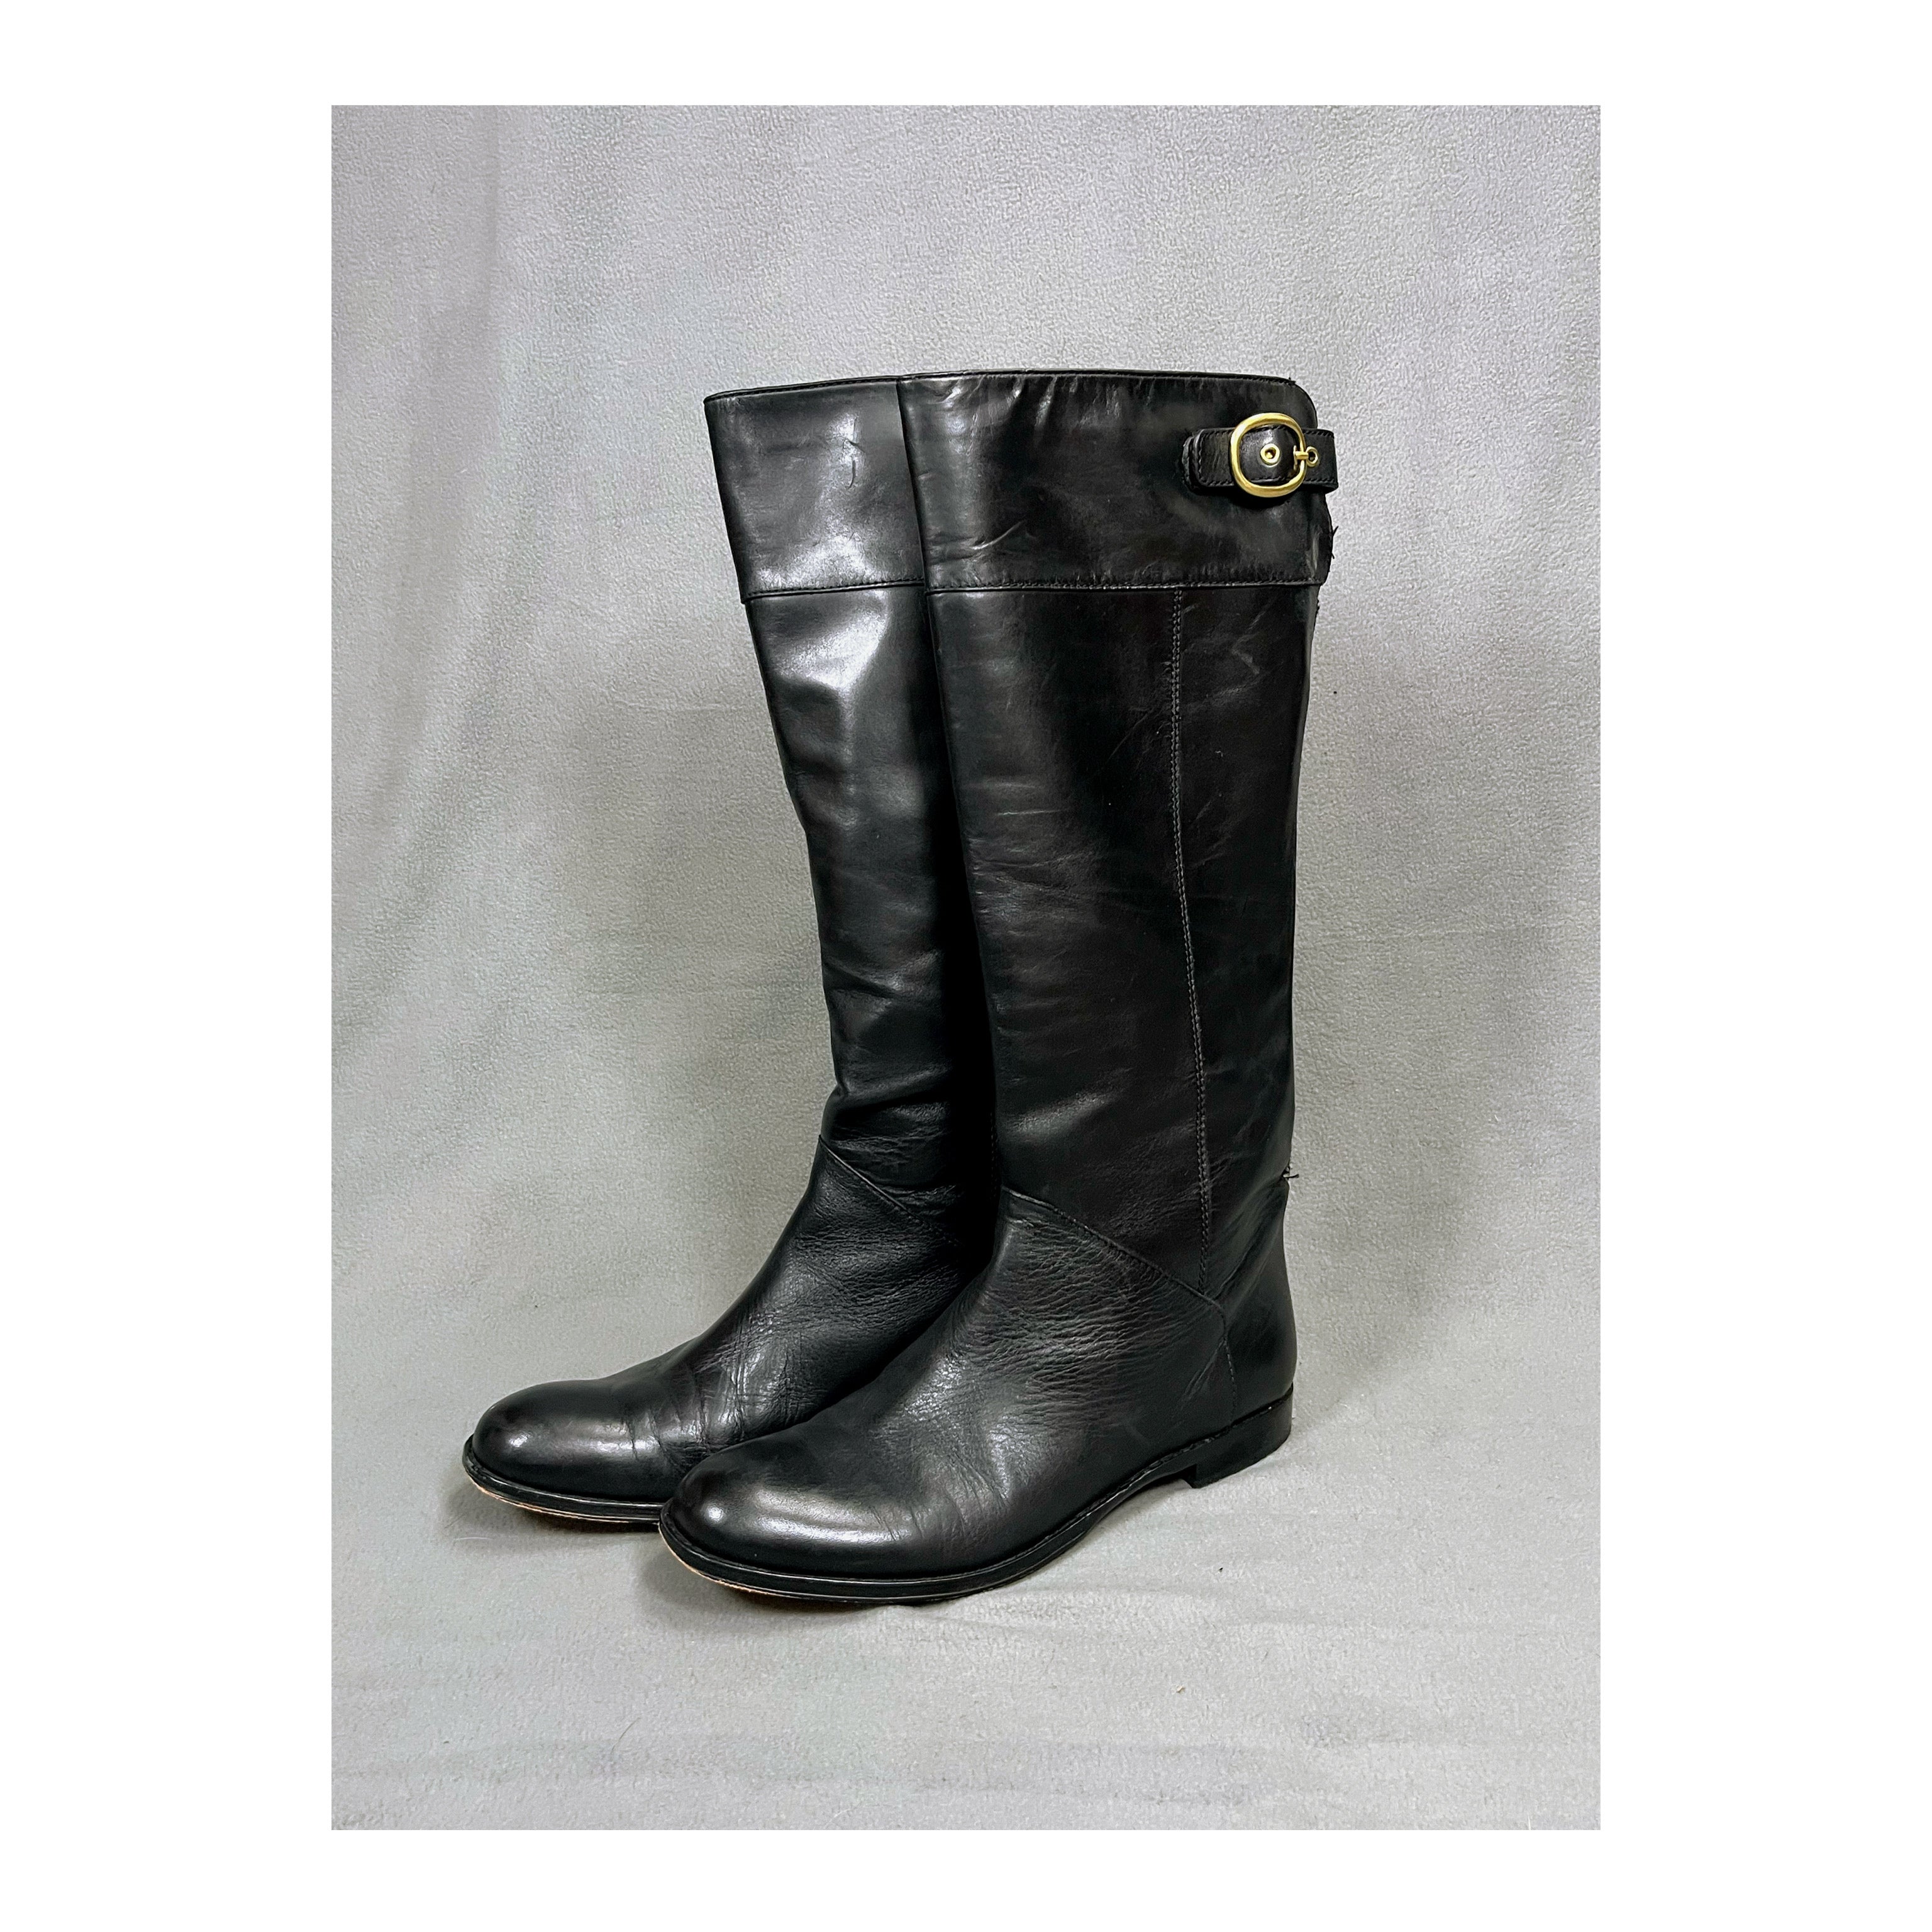 Coach black leather Maely boots, size 10